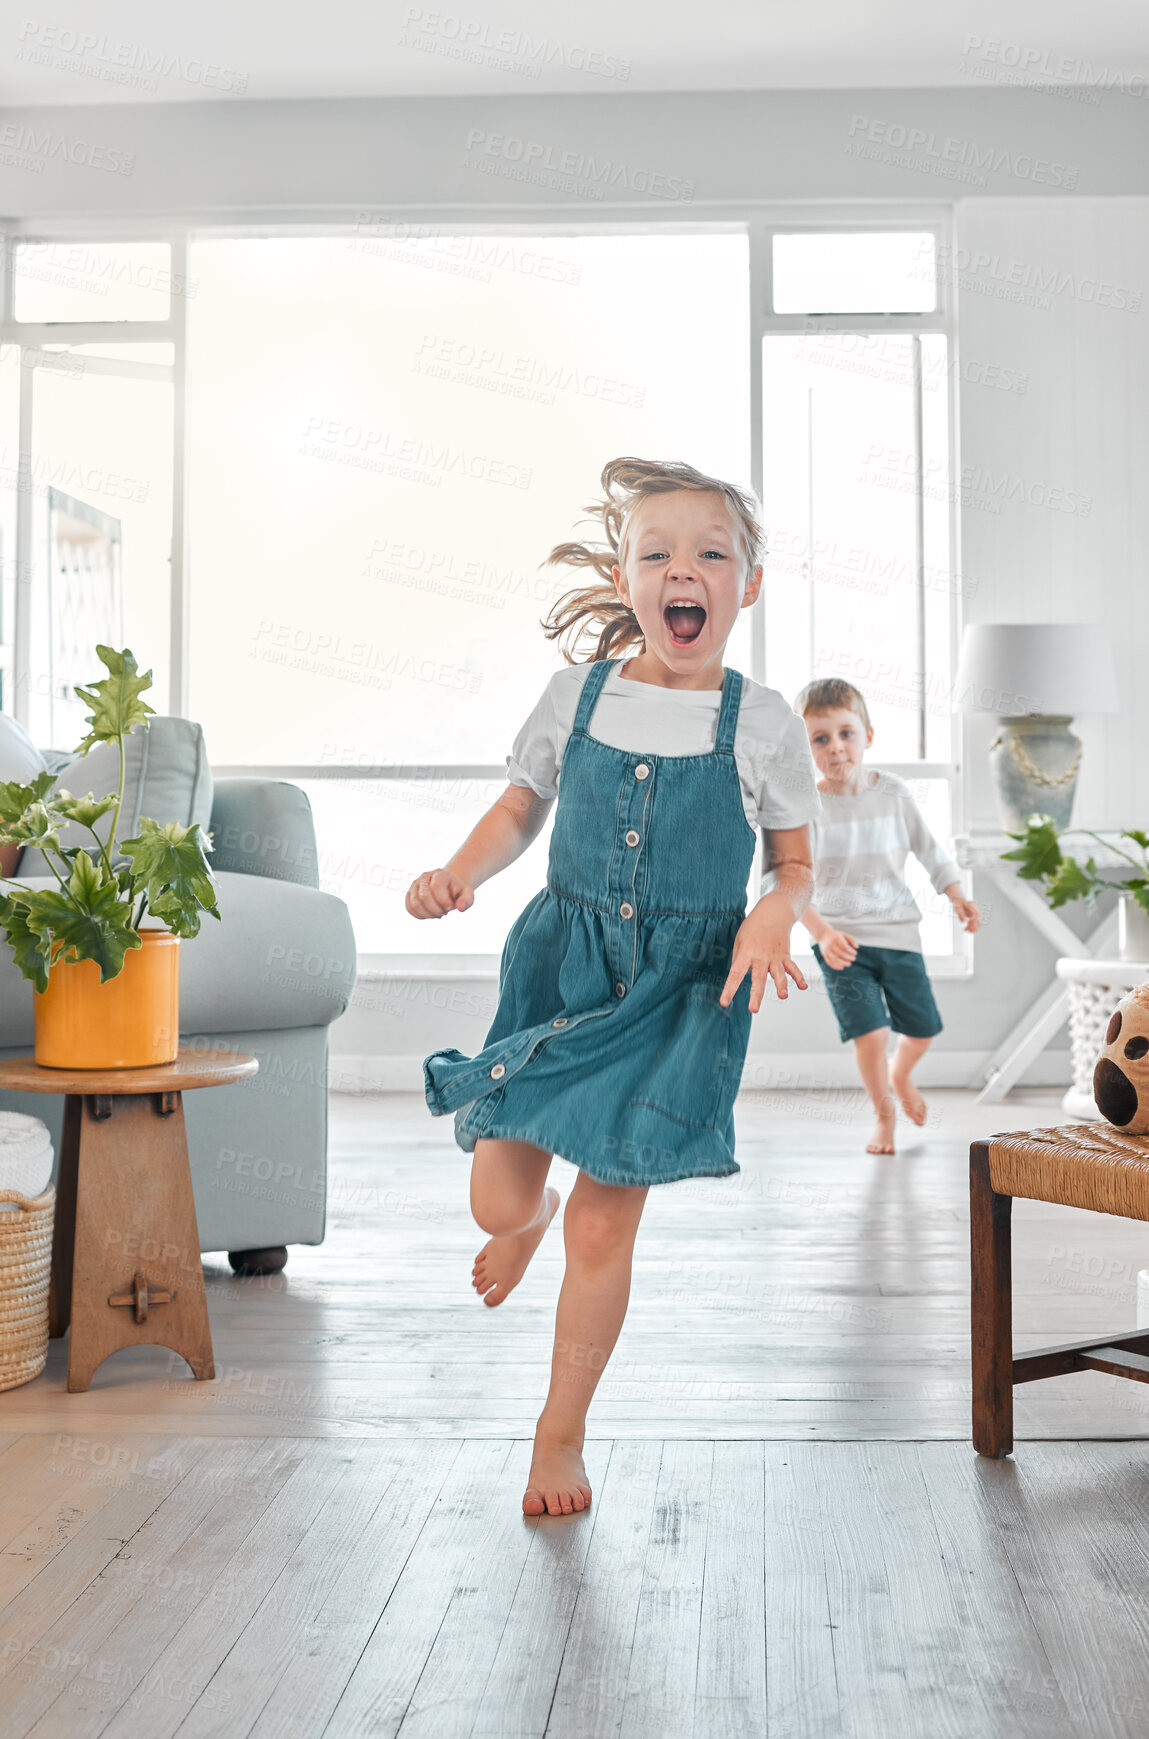 Buy stock photo Shot of a brother and sister running inside the house